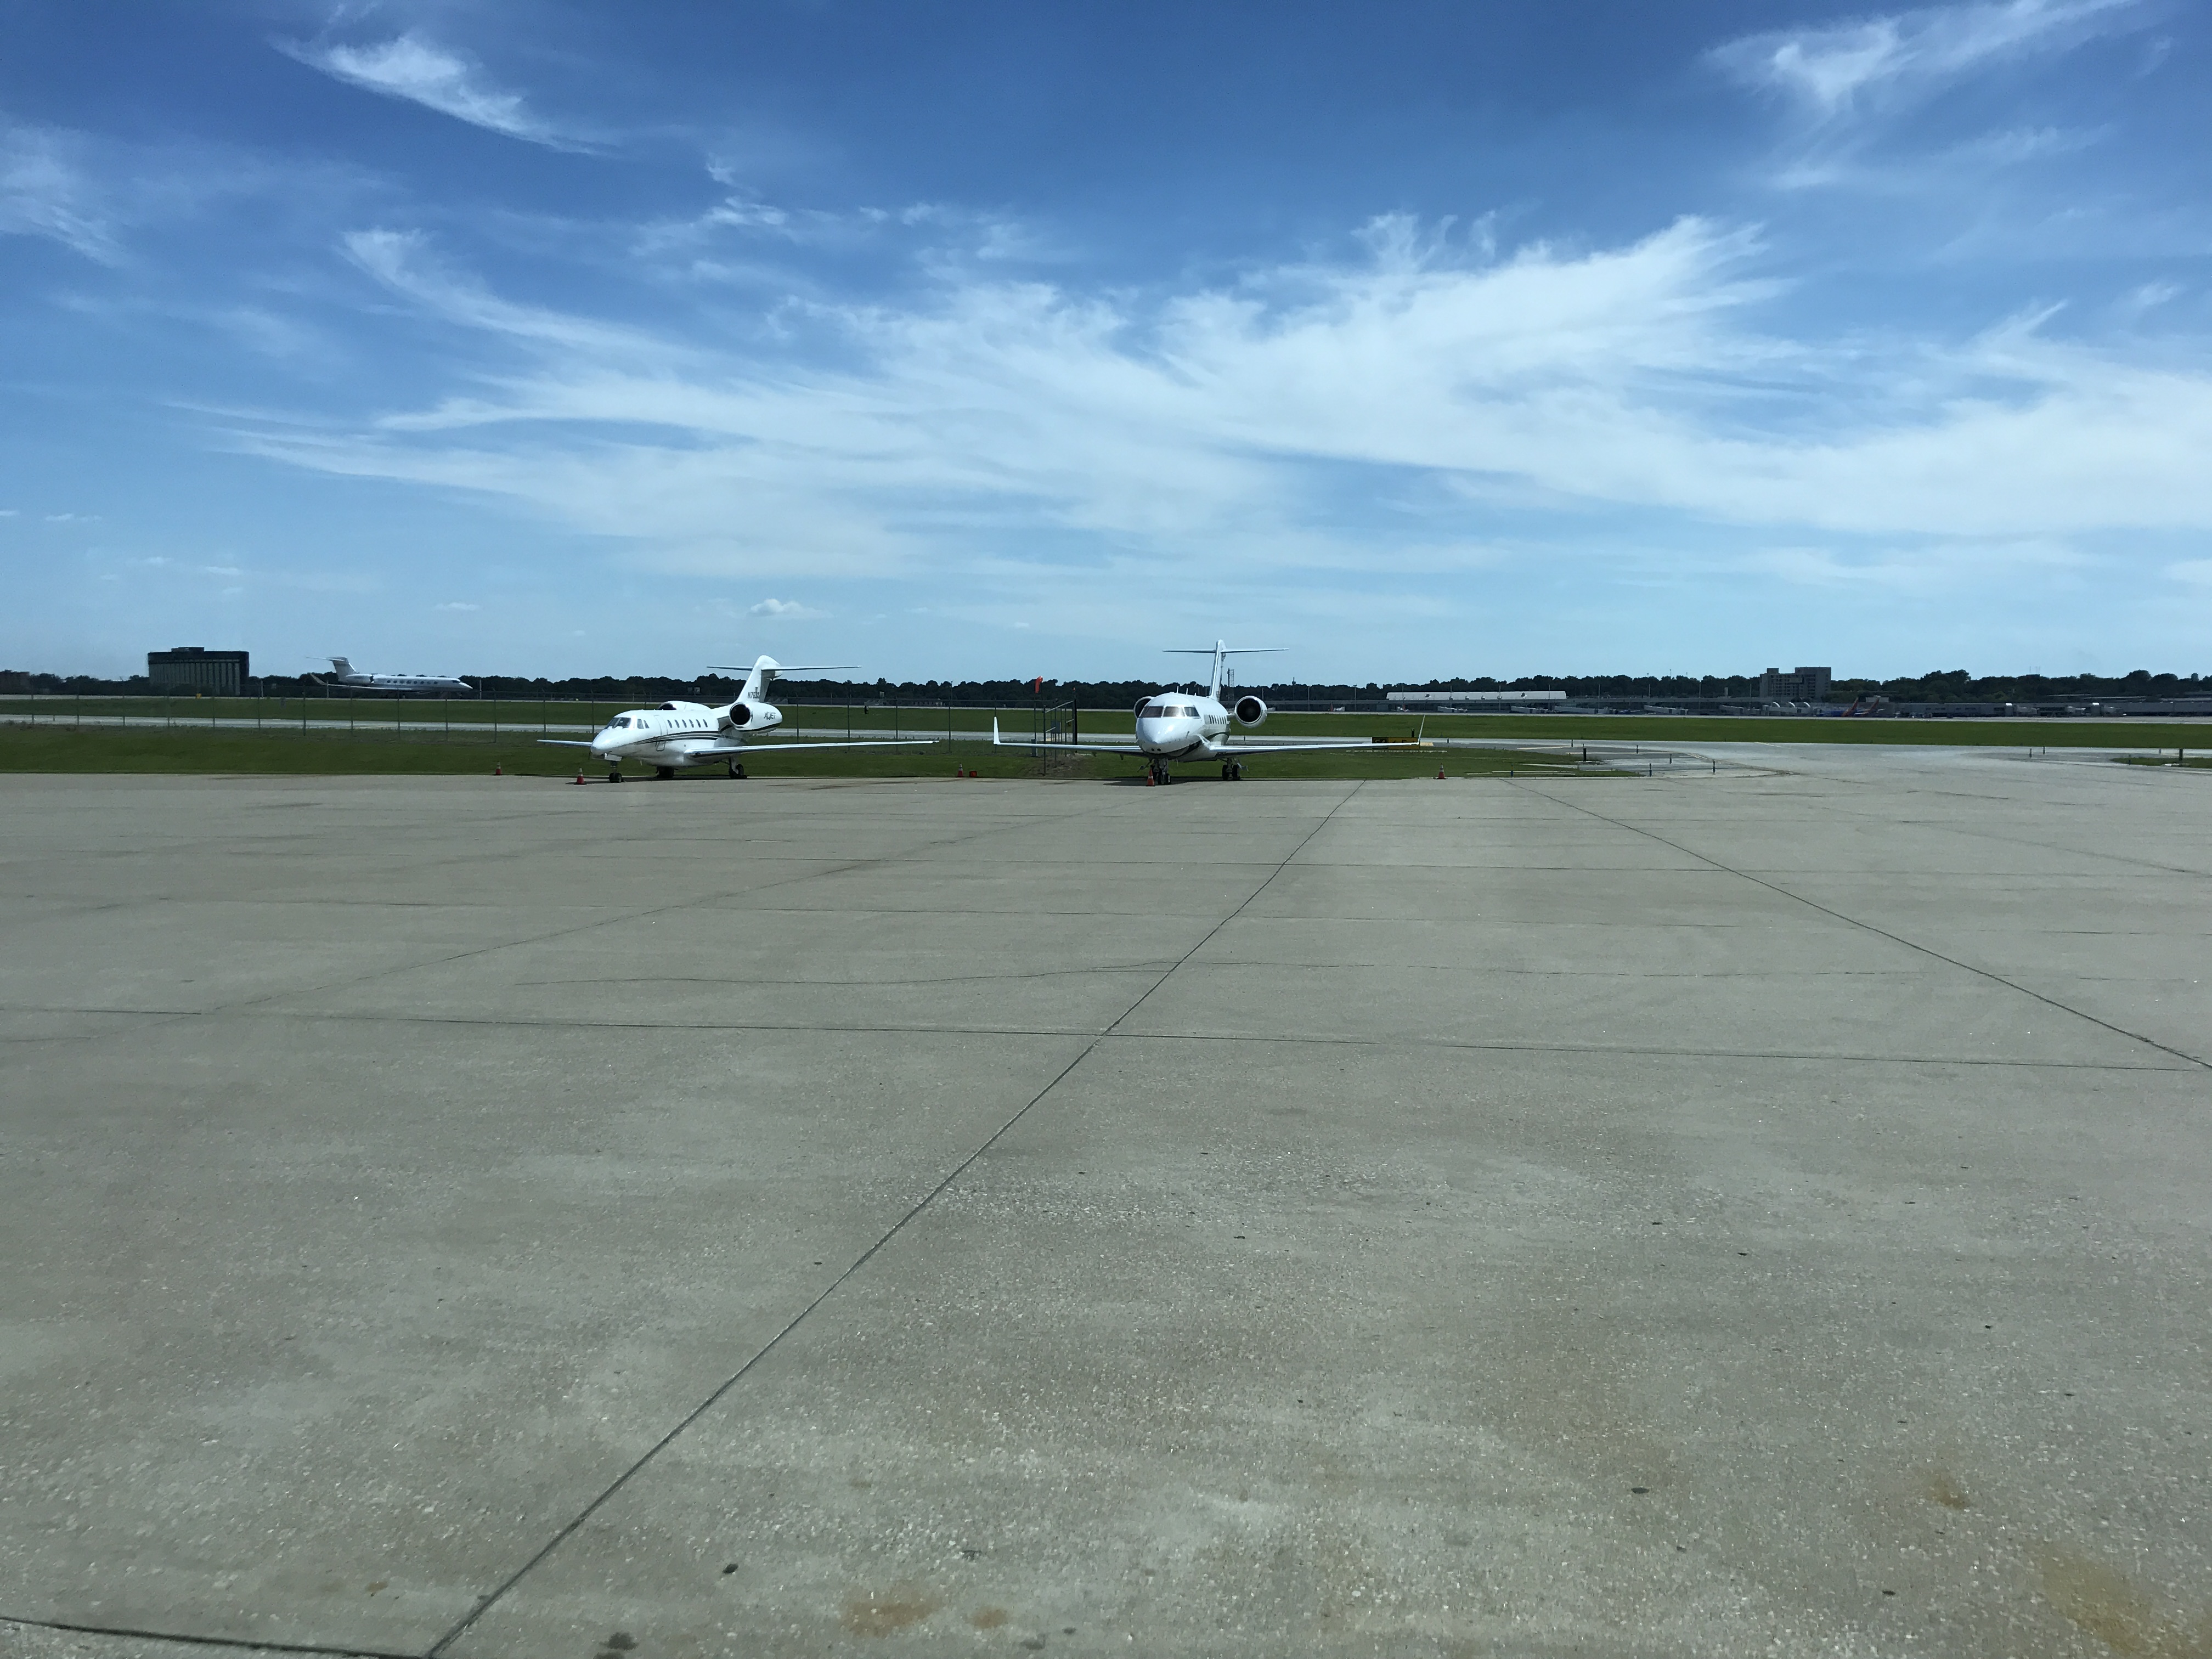 View of the private aviation ramp at Lambert Airport